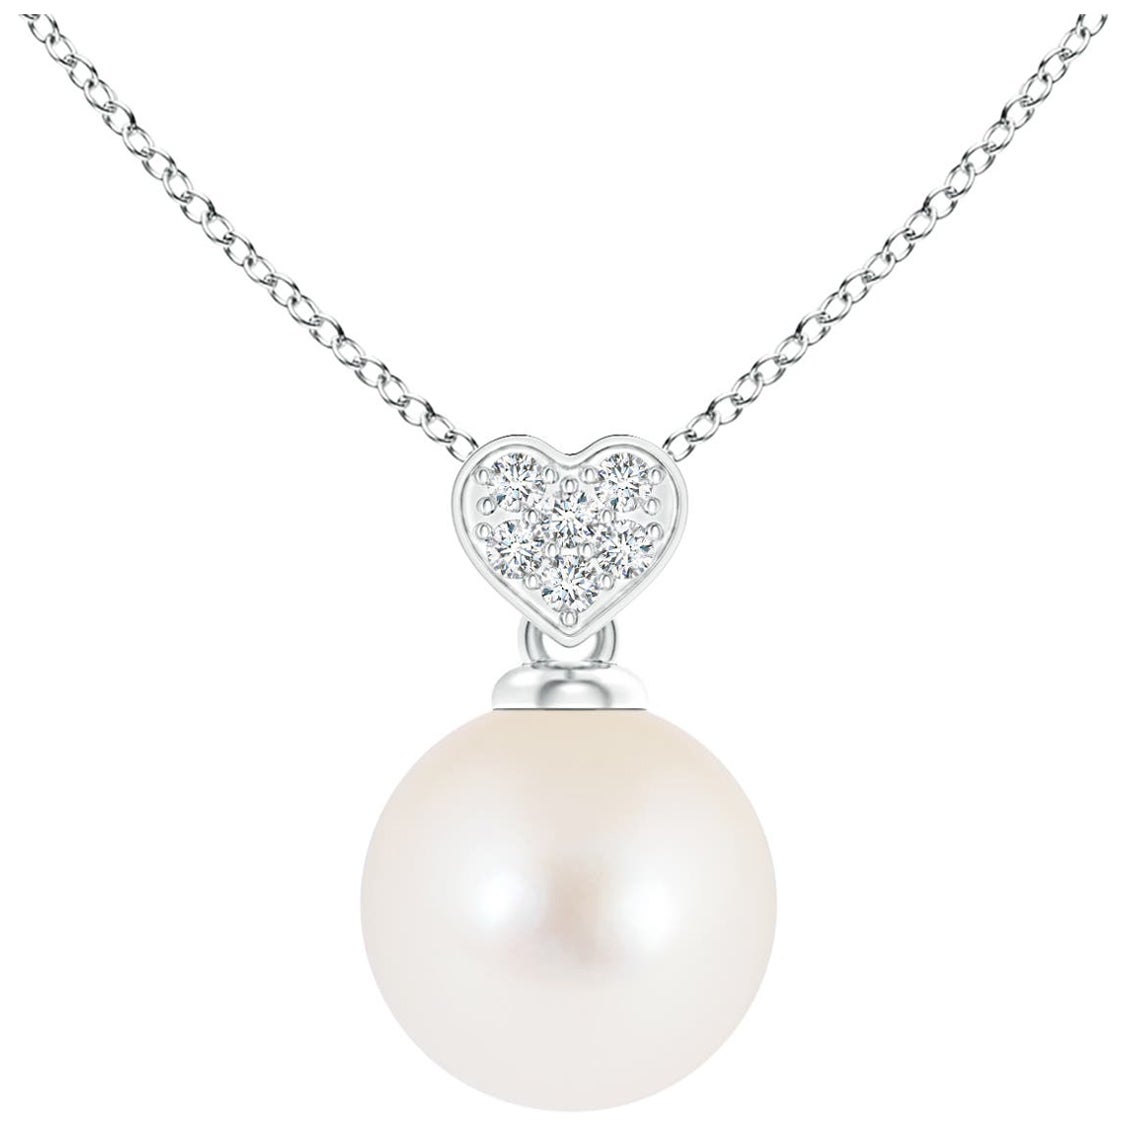 Freshwater Cultured Pearl Pendant with Heart-Shaped Bale in 14K White Gold